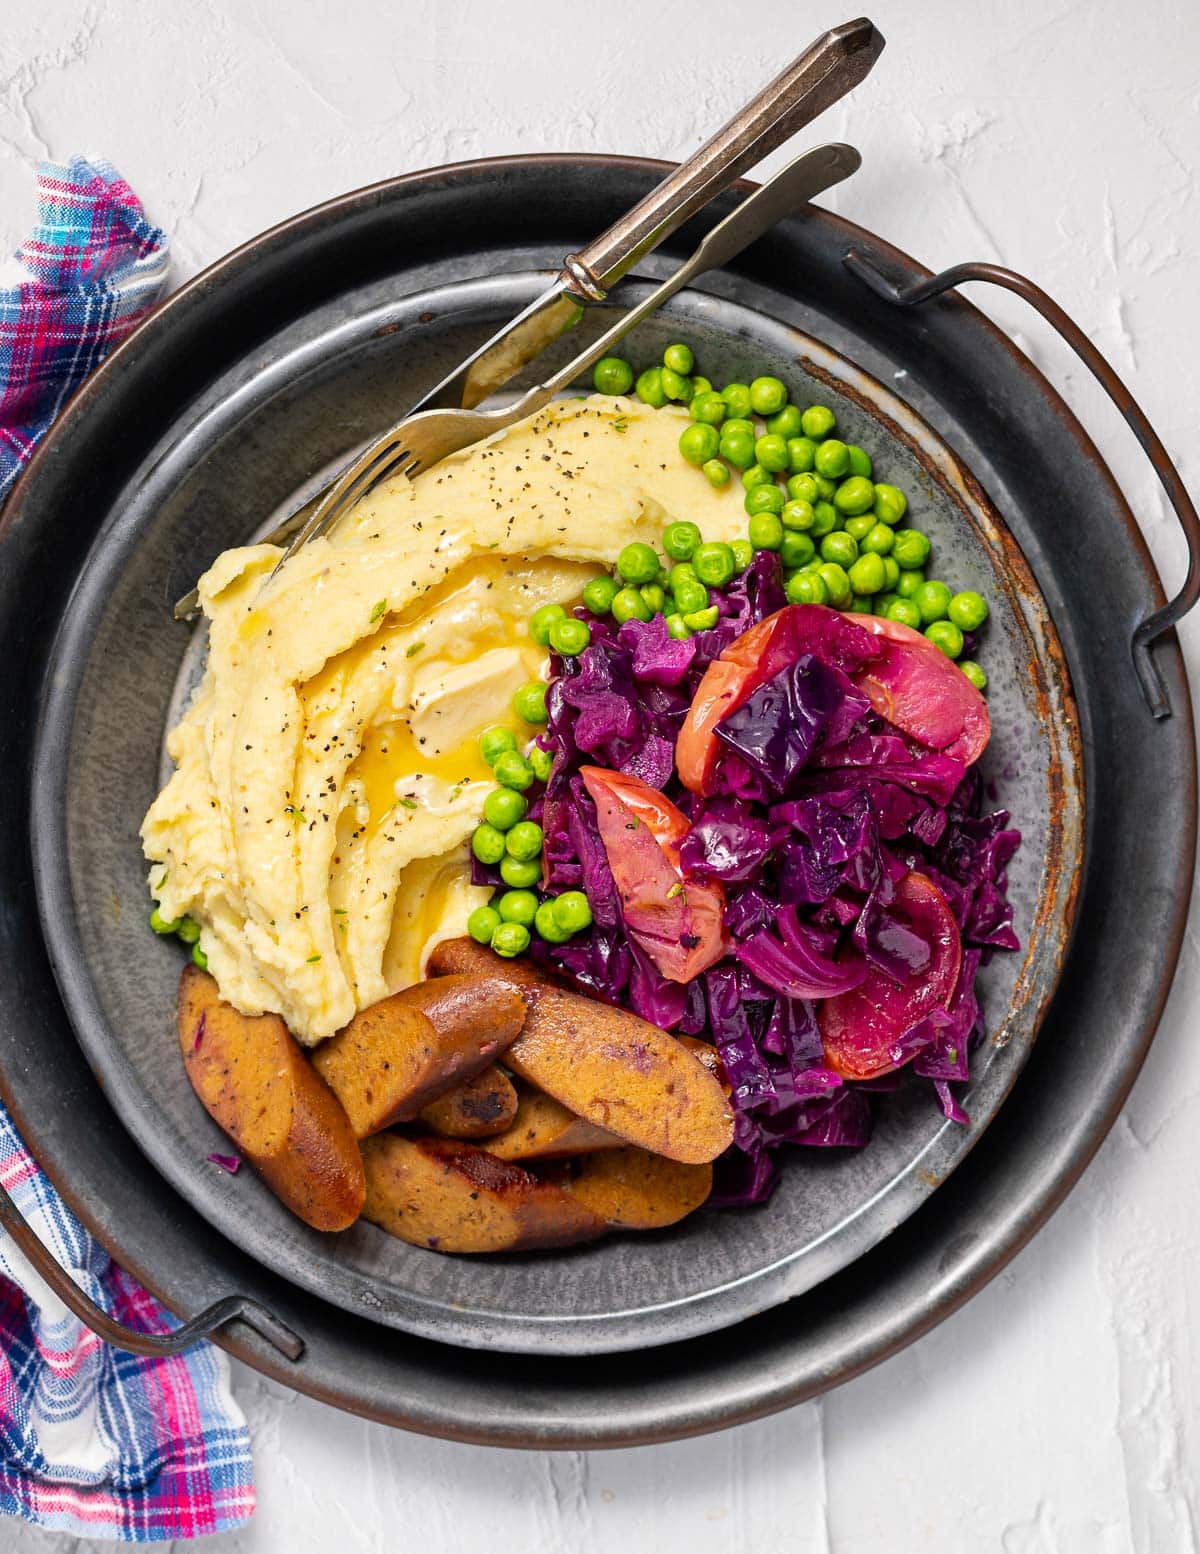 a plate of mashed potato, sausage, red cabbage and peas